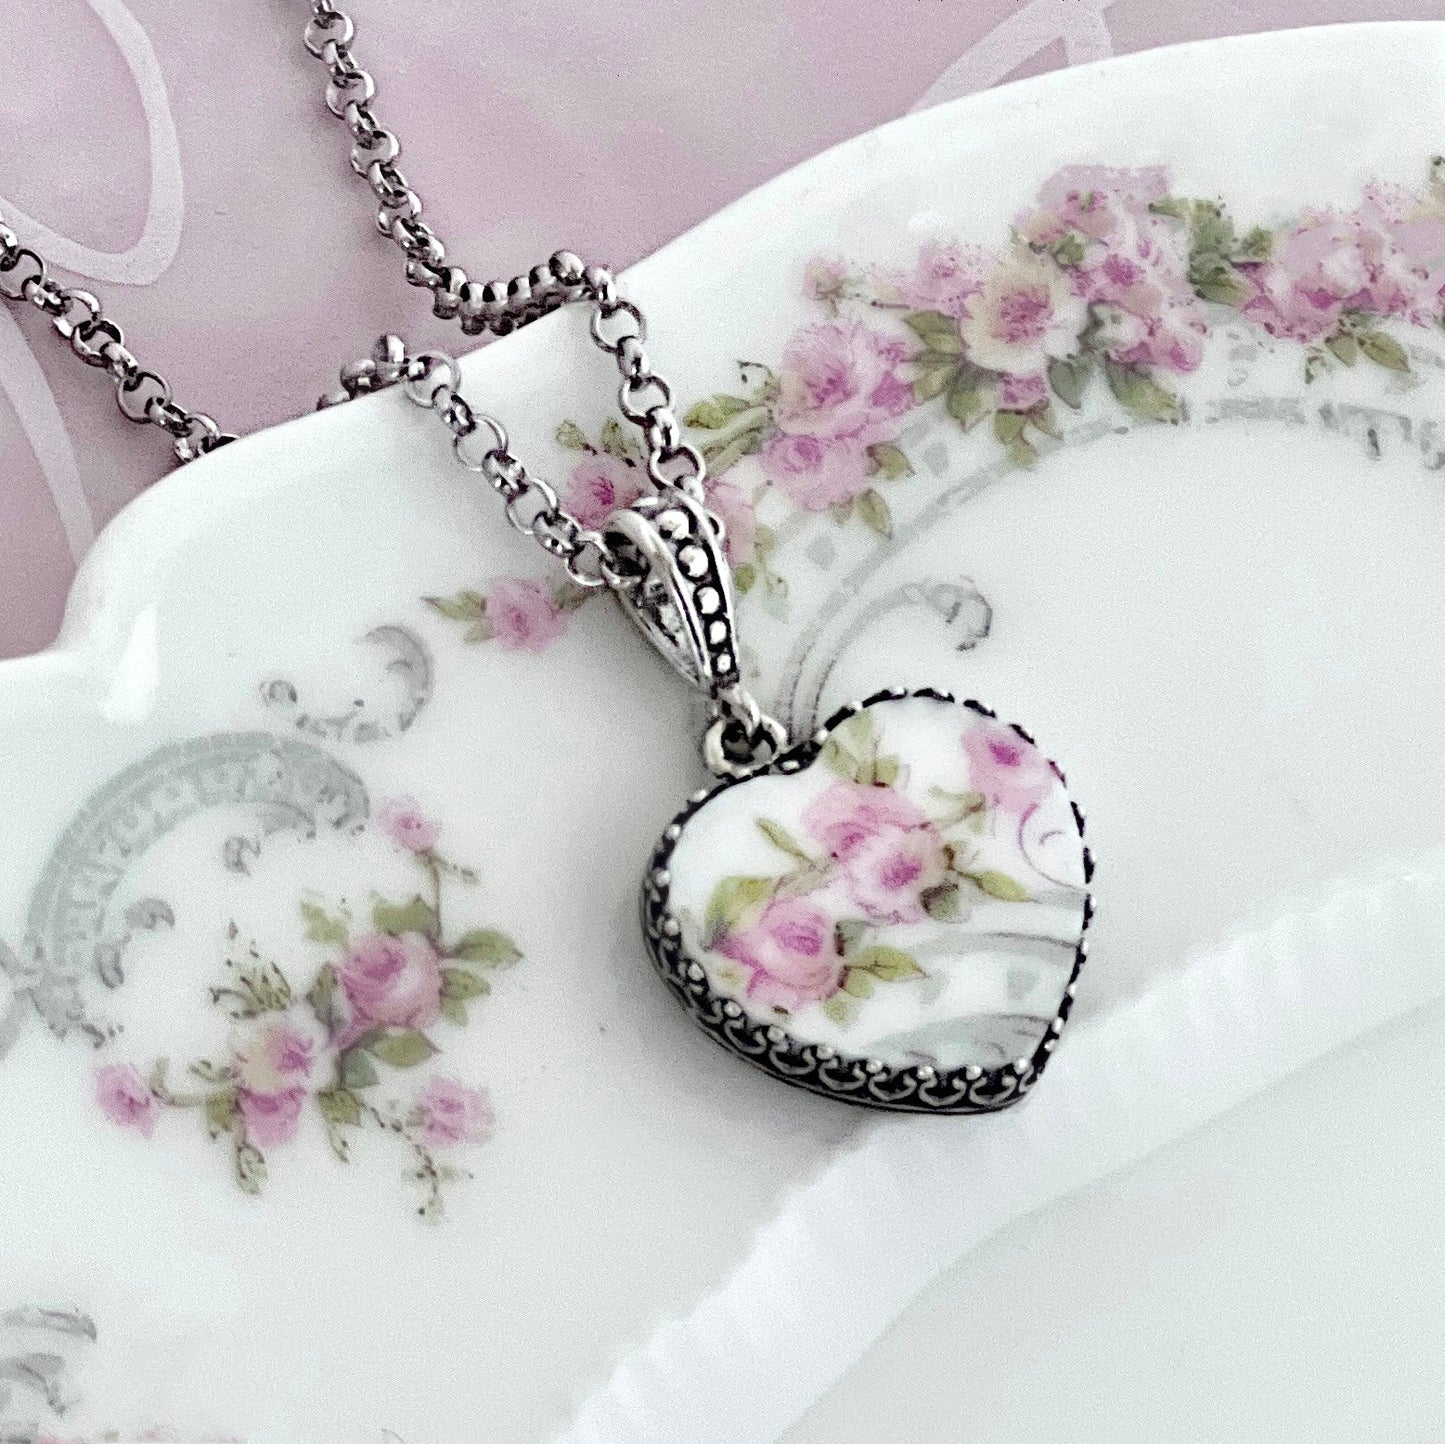 Victorian Heart Necklace, Unique Anniversary Gifts, Gift for Girlfriend, Limoges Porcelain Jewelry, Gifts for Women